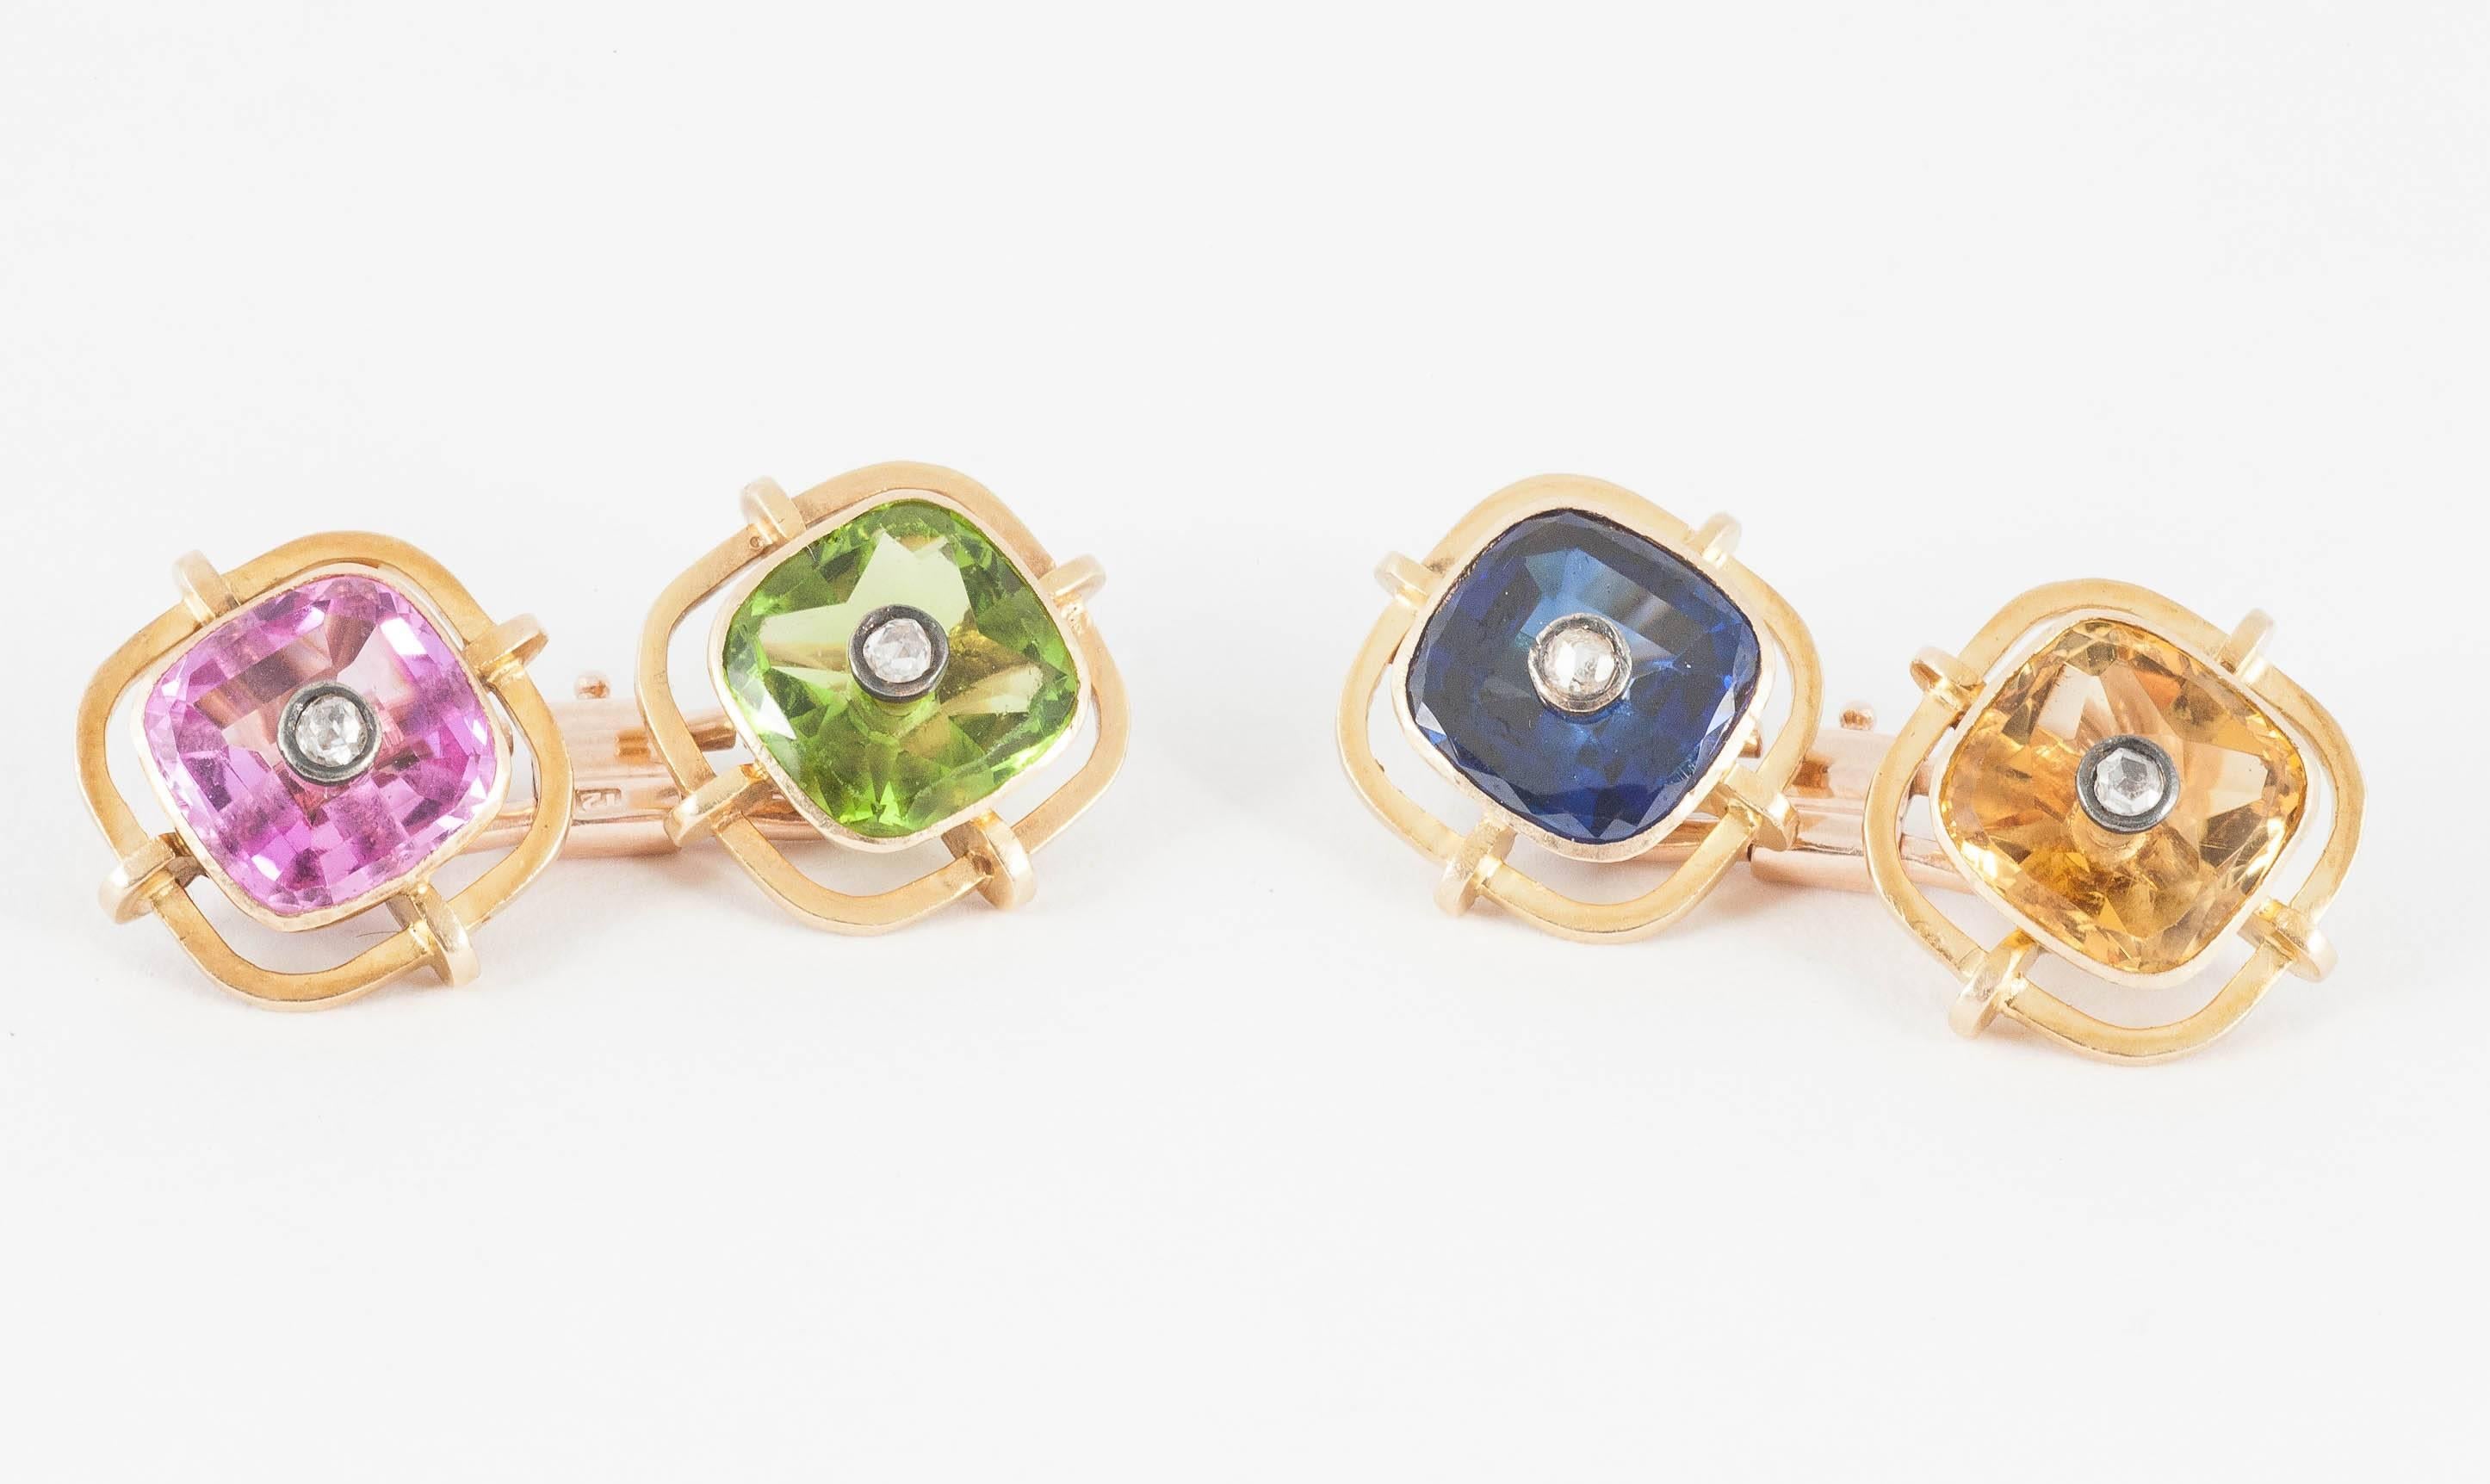 An unusual pair of gold mounted cufflinks set with a green peridot,yellow citrine,blue paste [glass] and pink paste [glass] each with a rose cut diamond centre,heavy quality,c,1920